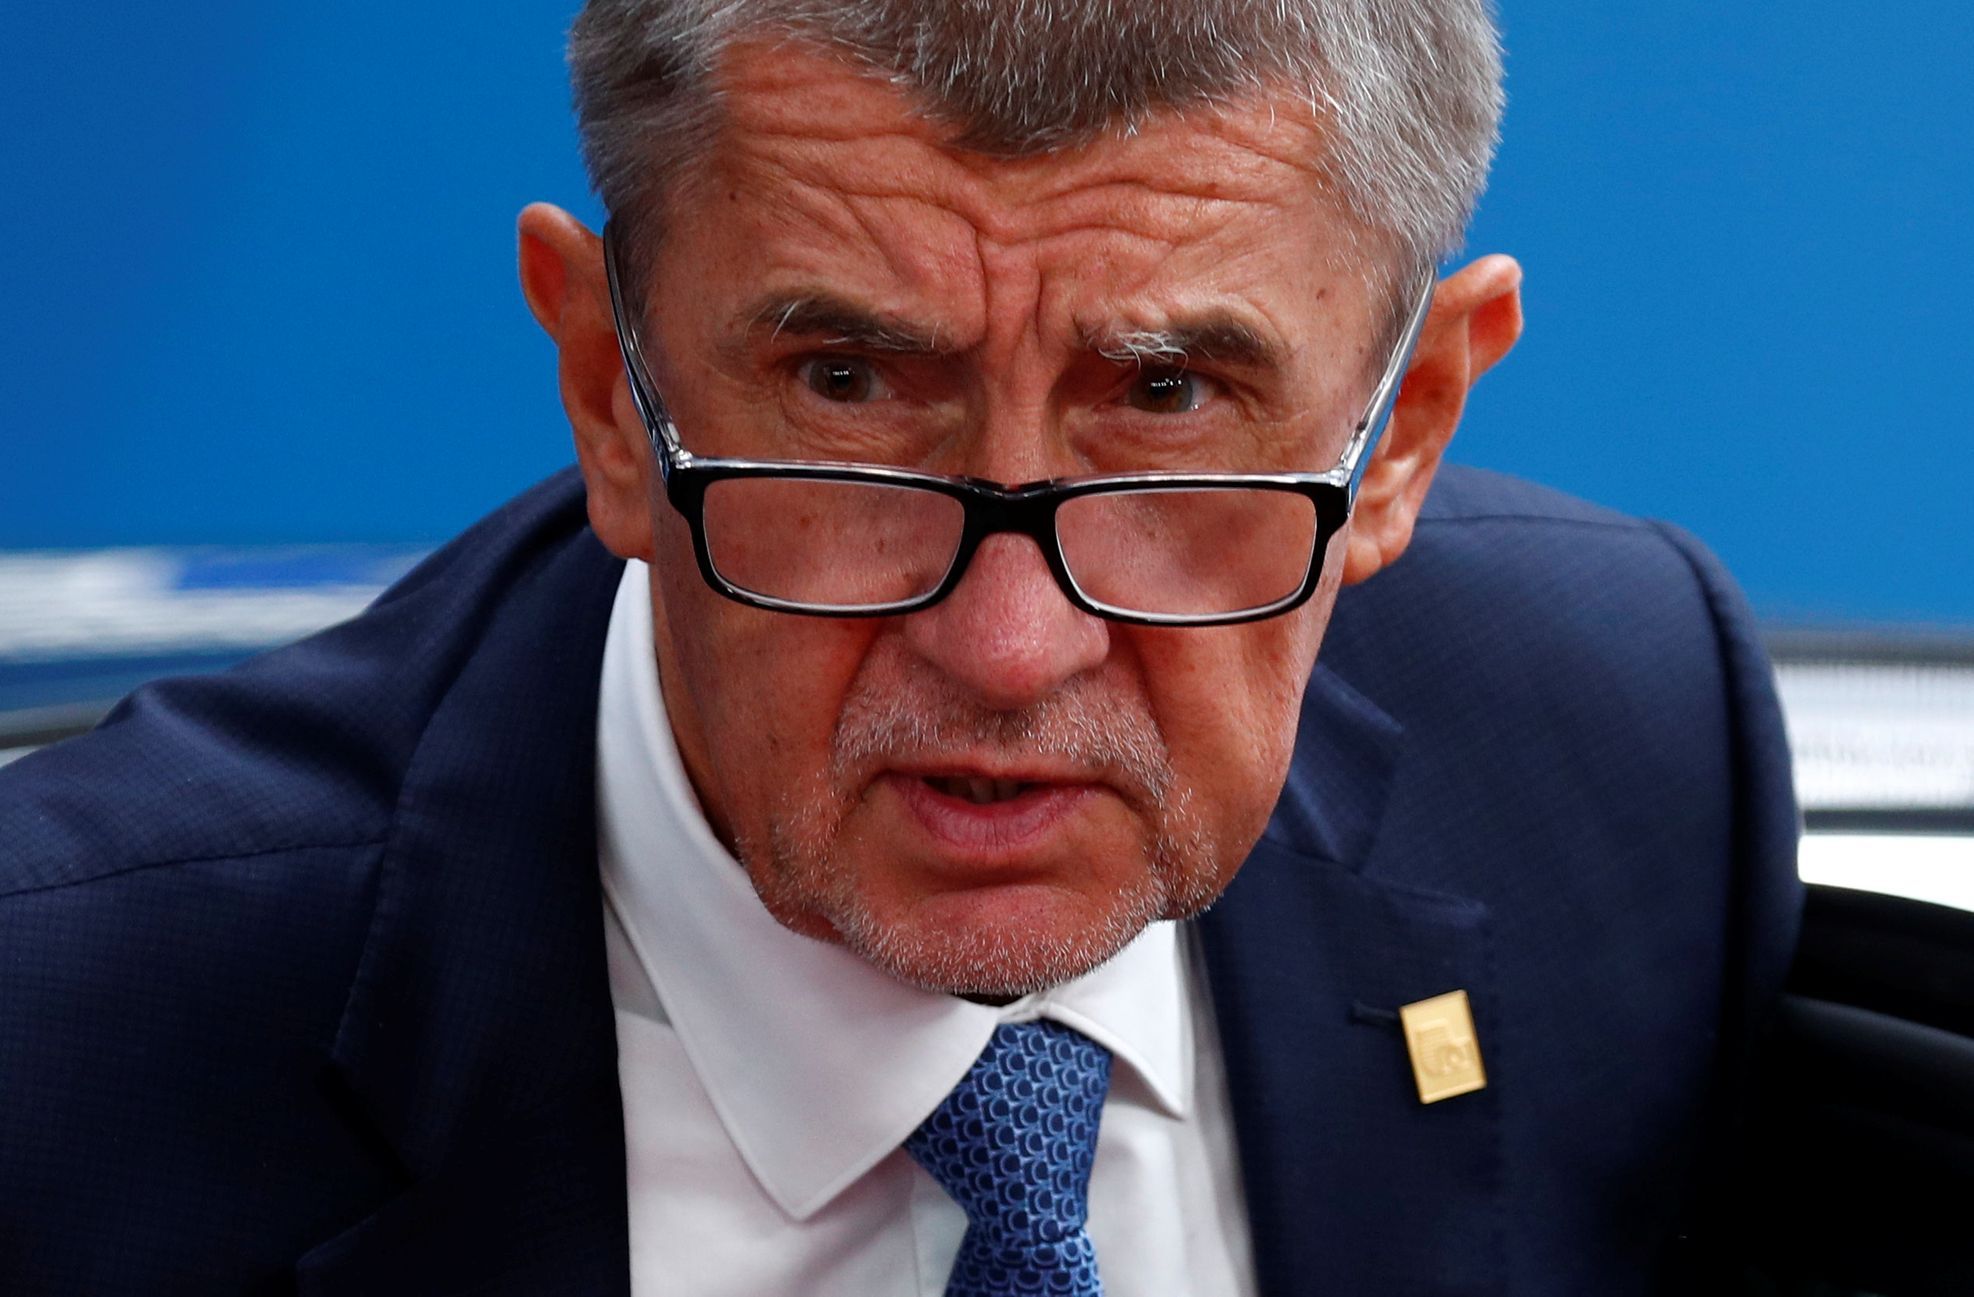 That’s interesting, but don’t fear the apocalypse, Babiš responded to Thunberg’s speech